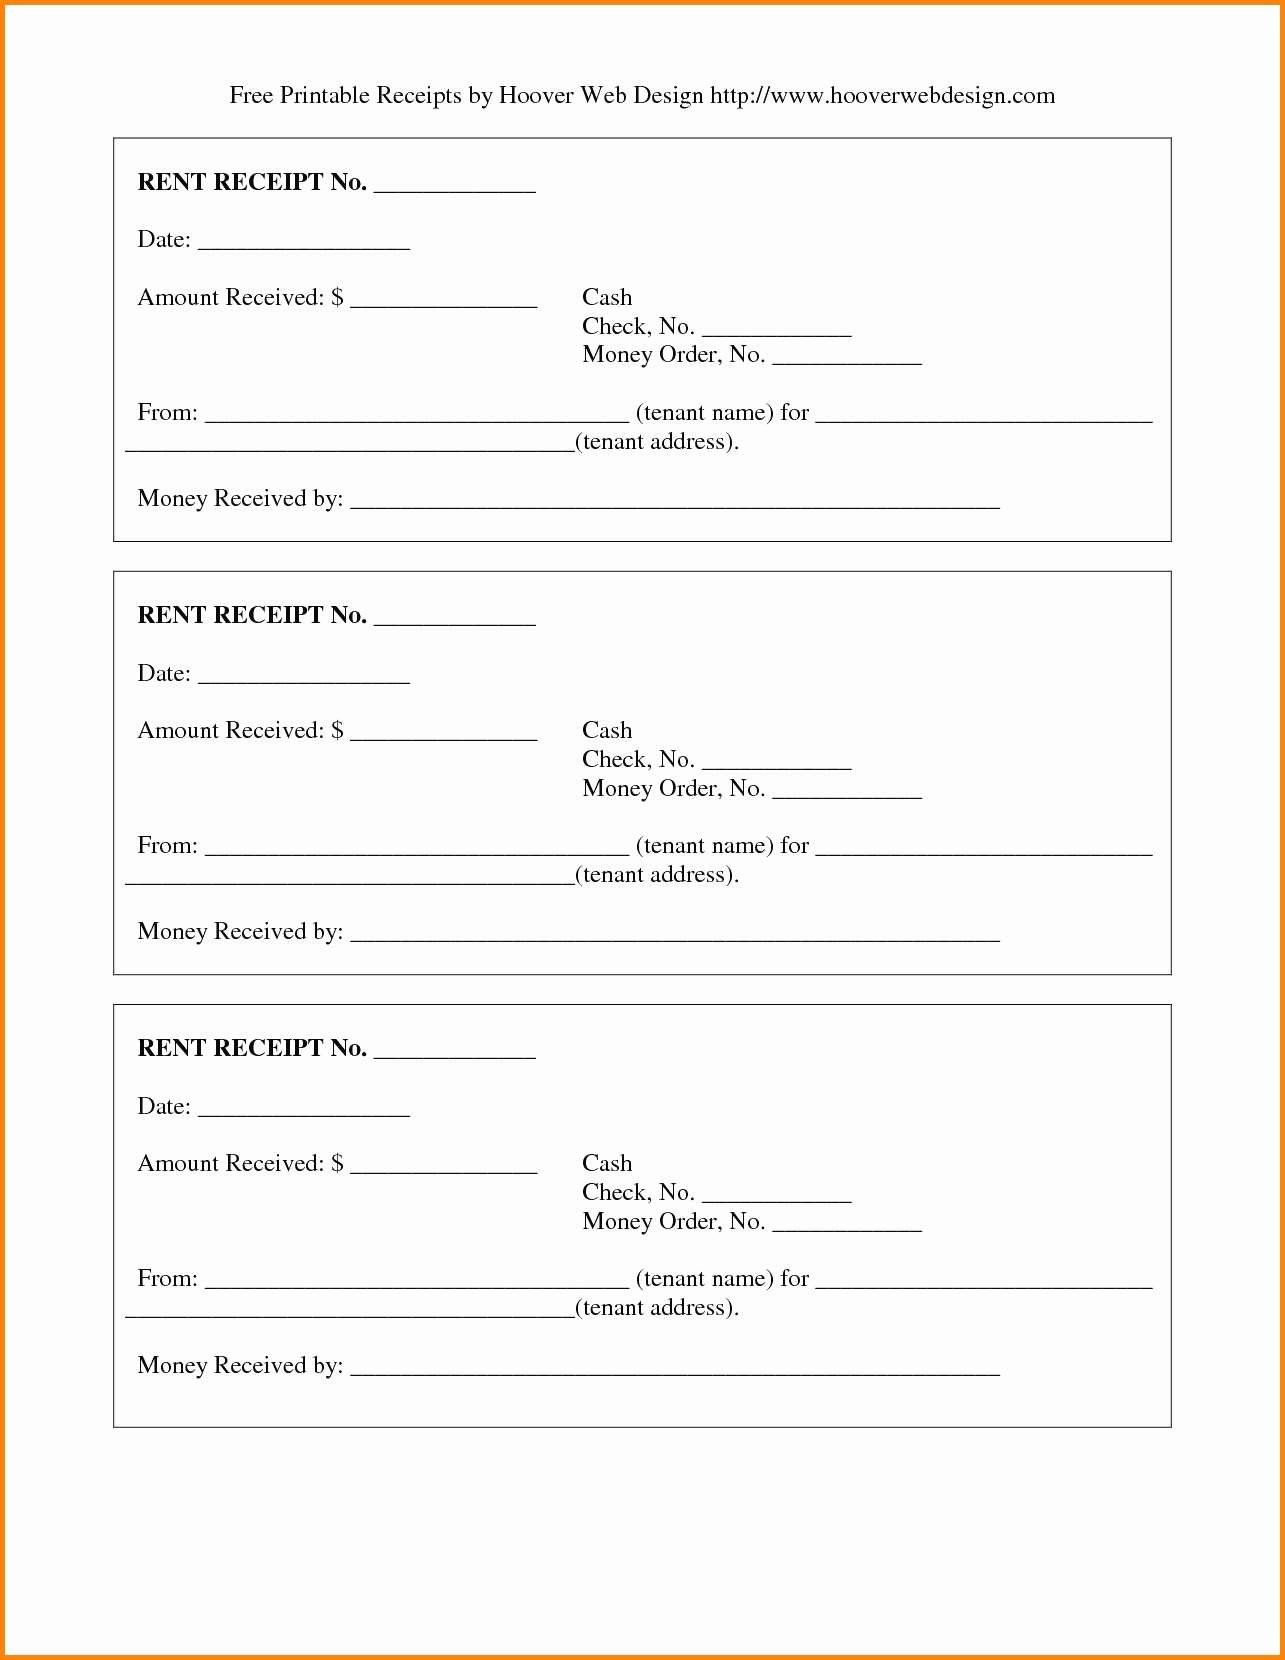 Blank Pay Stubs Template Free Best Of New Free Payroll Check Stub Template